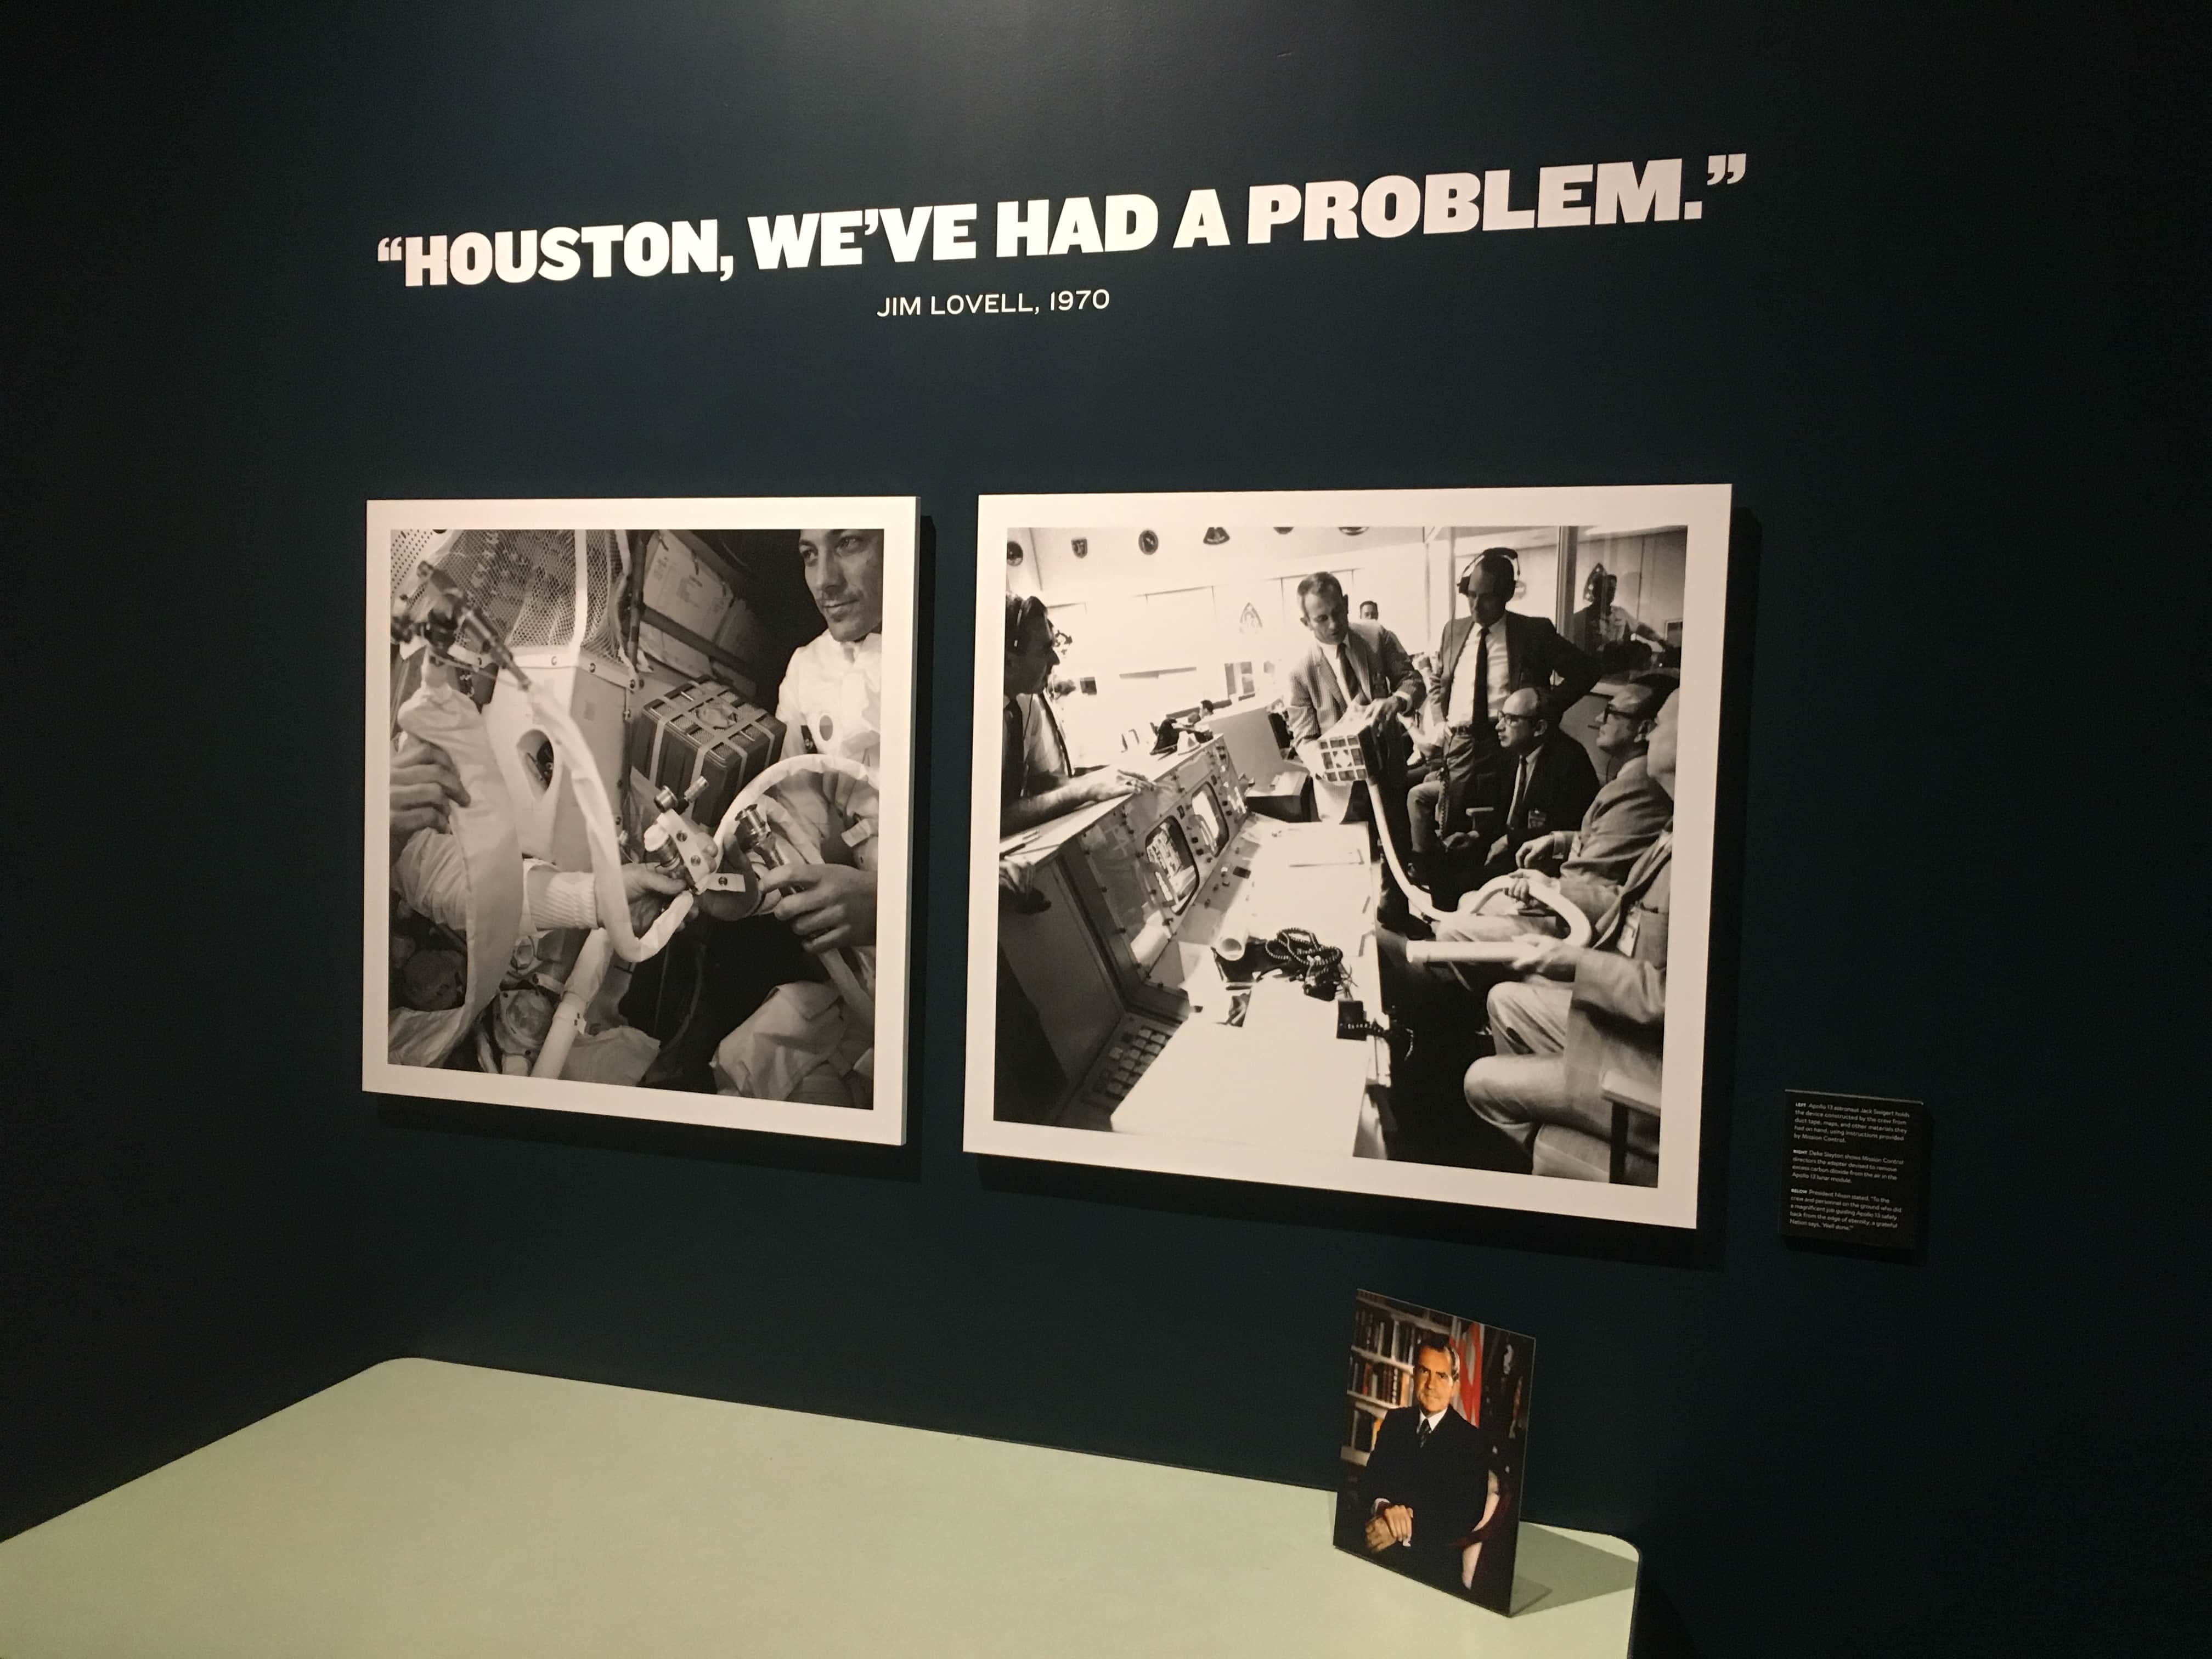 "Houston, we've had a problem." at Mission Moon